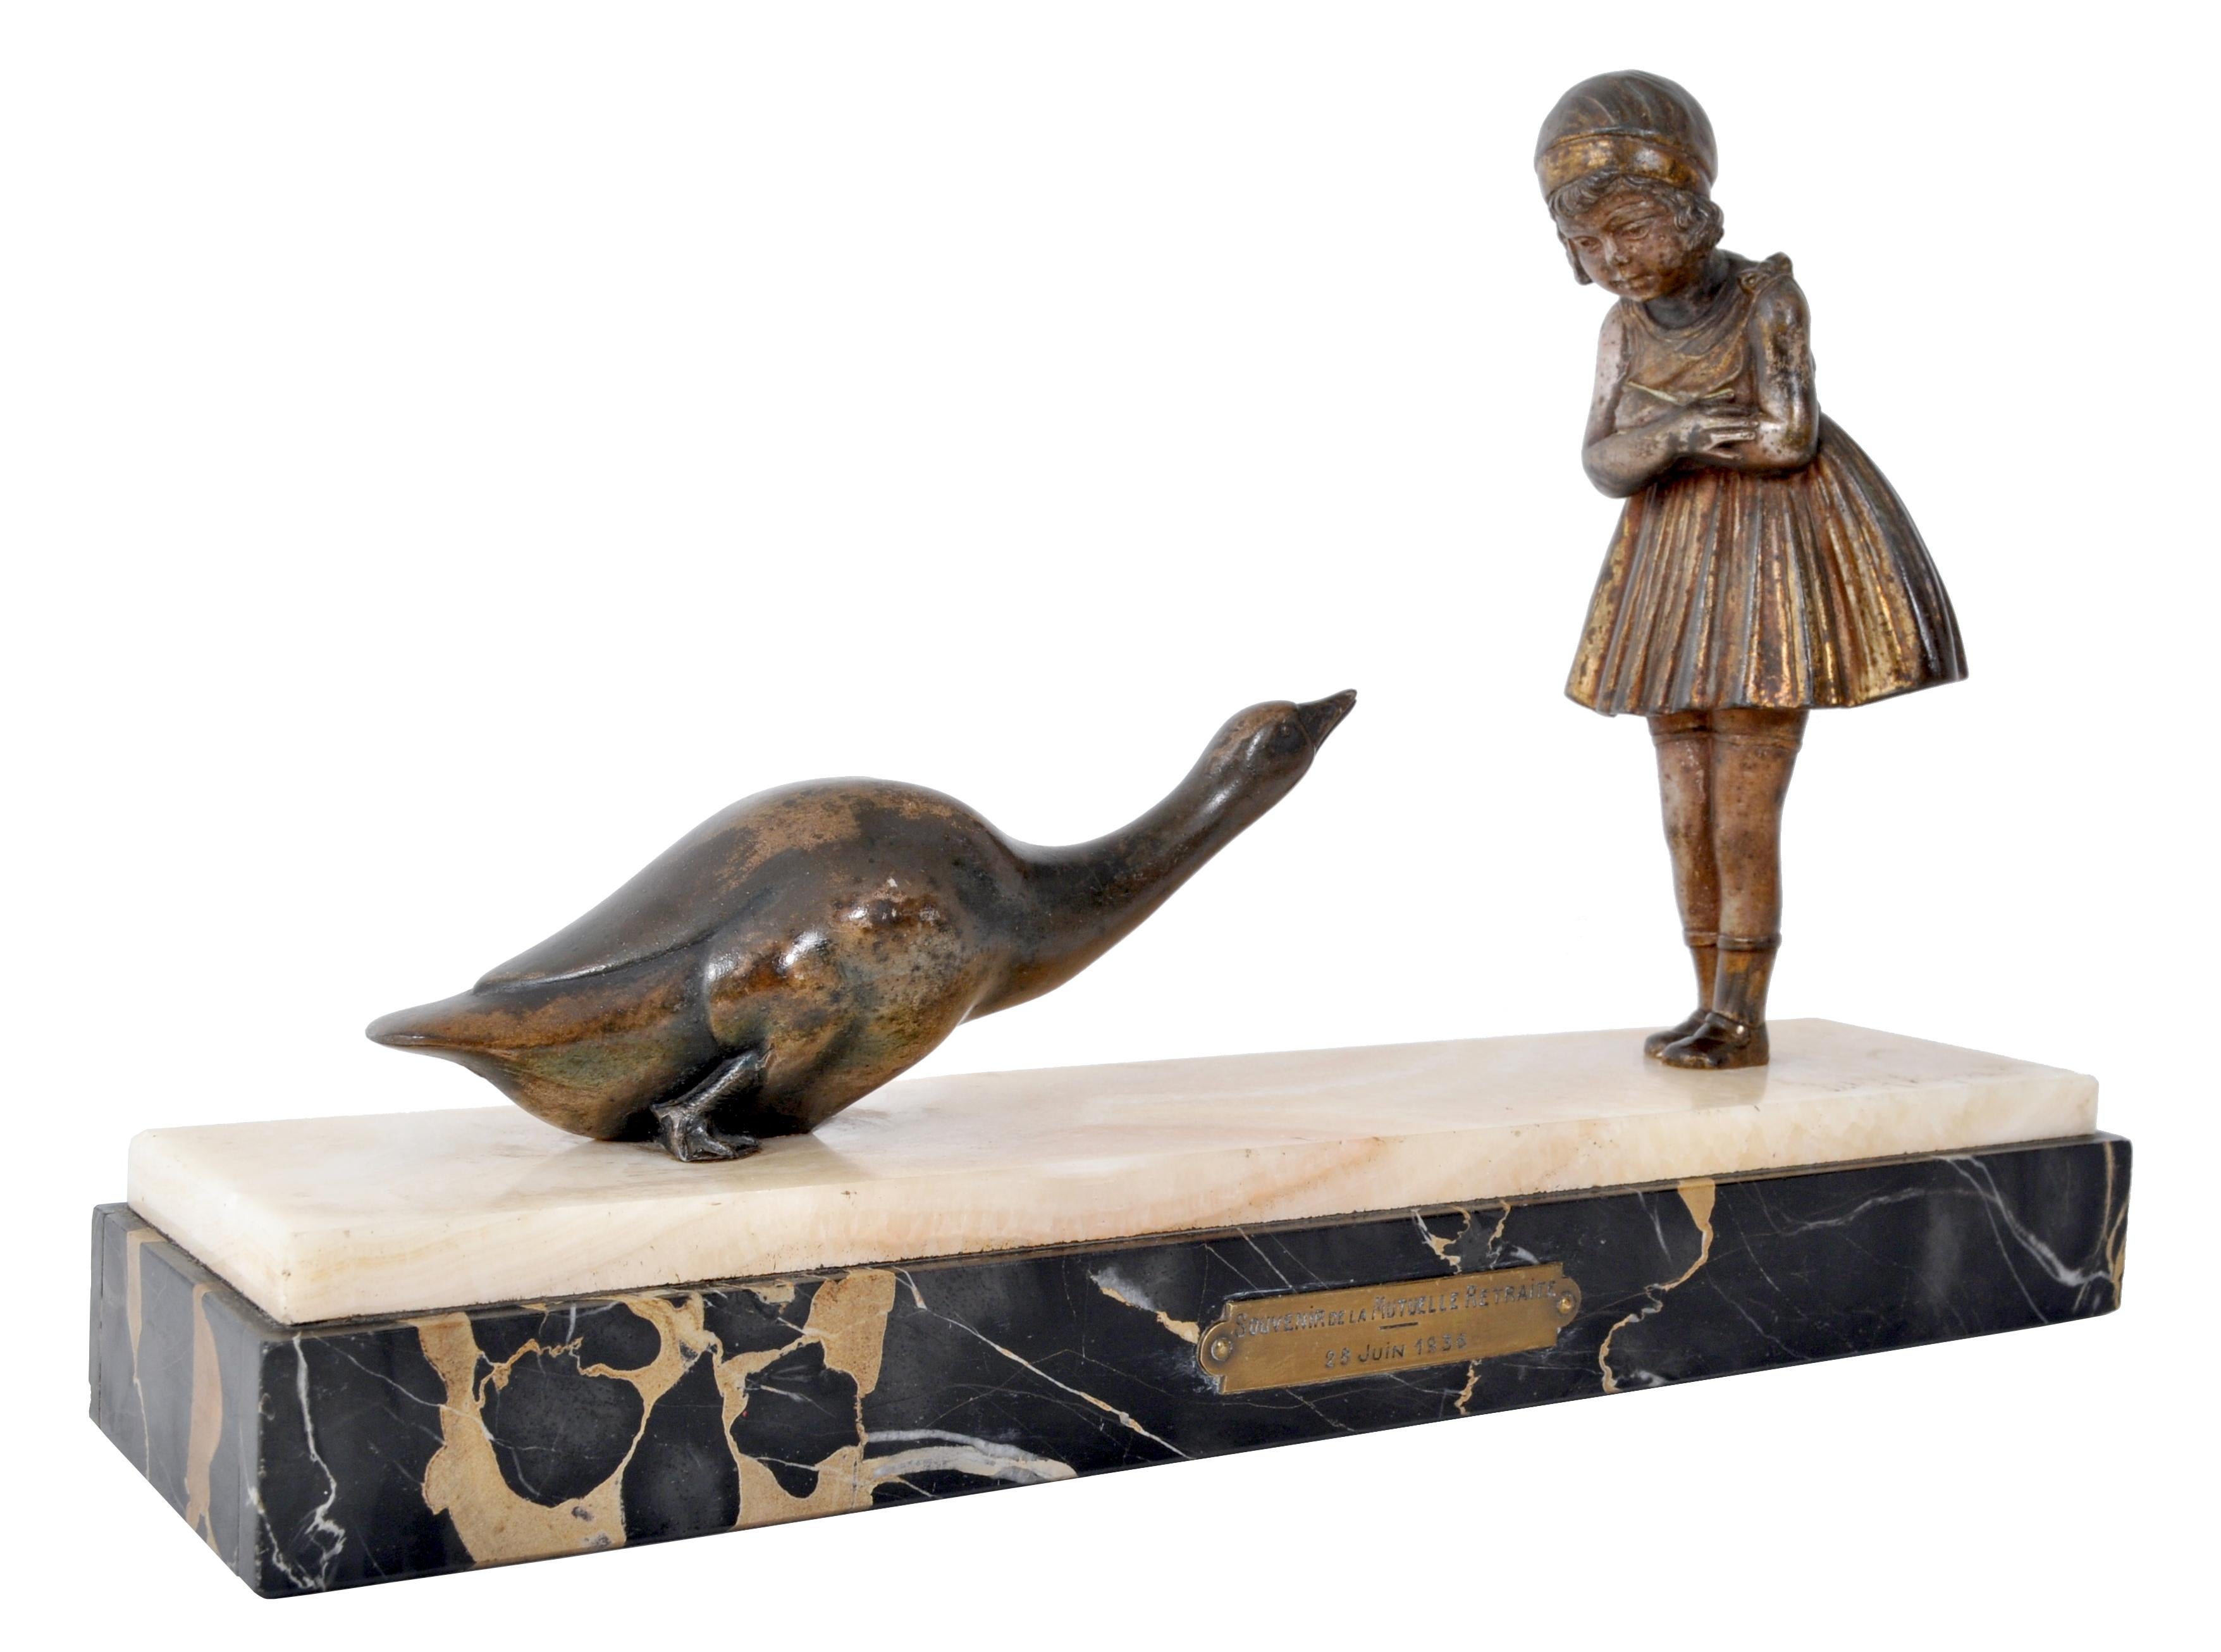 Antique French Art Deco bronze figural group / statue, Demetre Haralamb Chiparus (1886-1947), 1930s. The bronze showing a whimsical scene of a pretty young girl and an inquisitive goose. The bronzed figures mounted on a white Carrara marble and